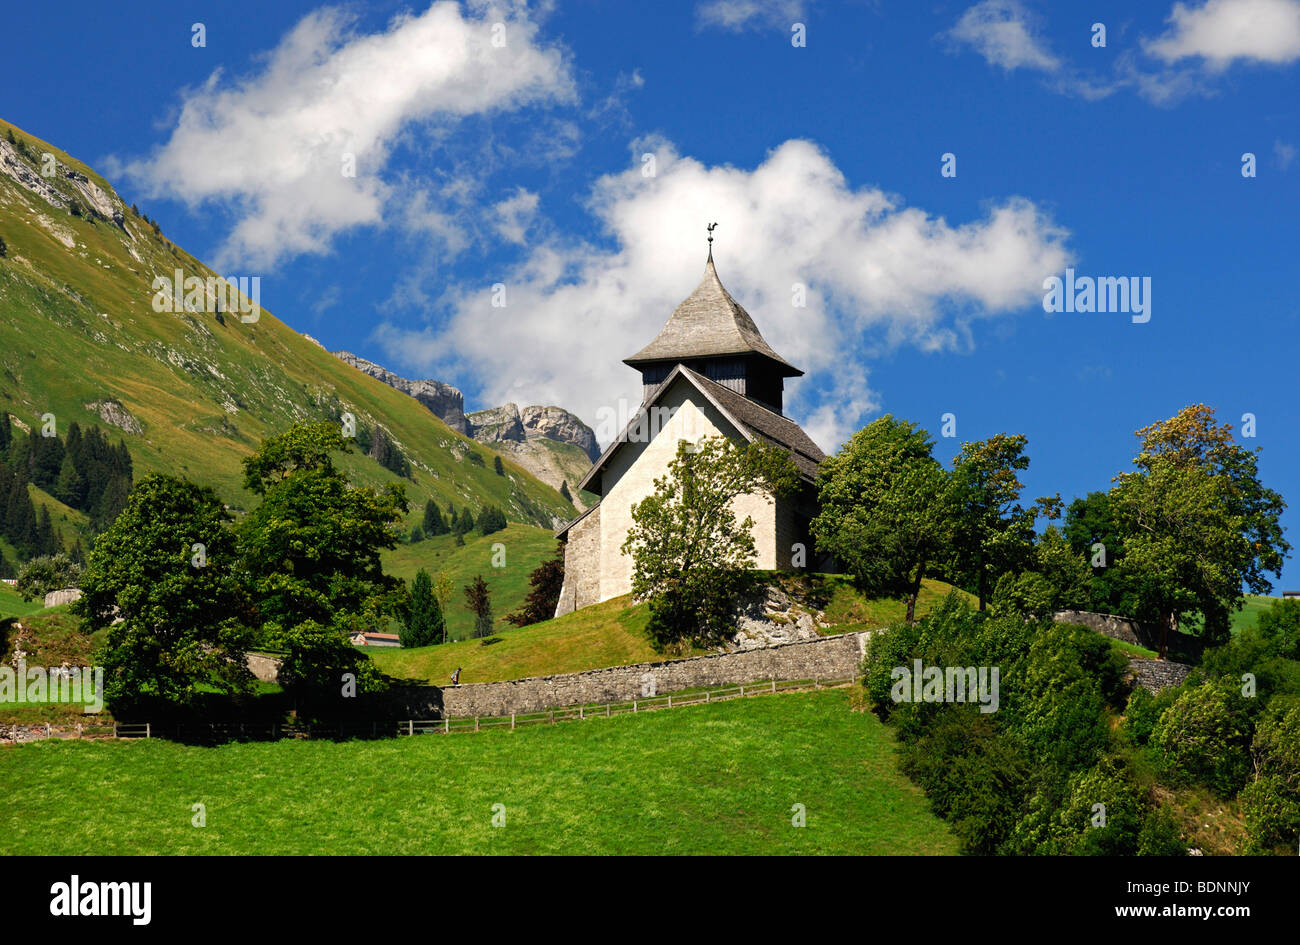 Den Glauben High Resolution Stock Photography and Images - Alamy